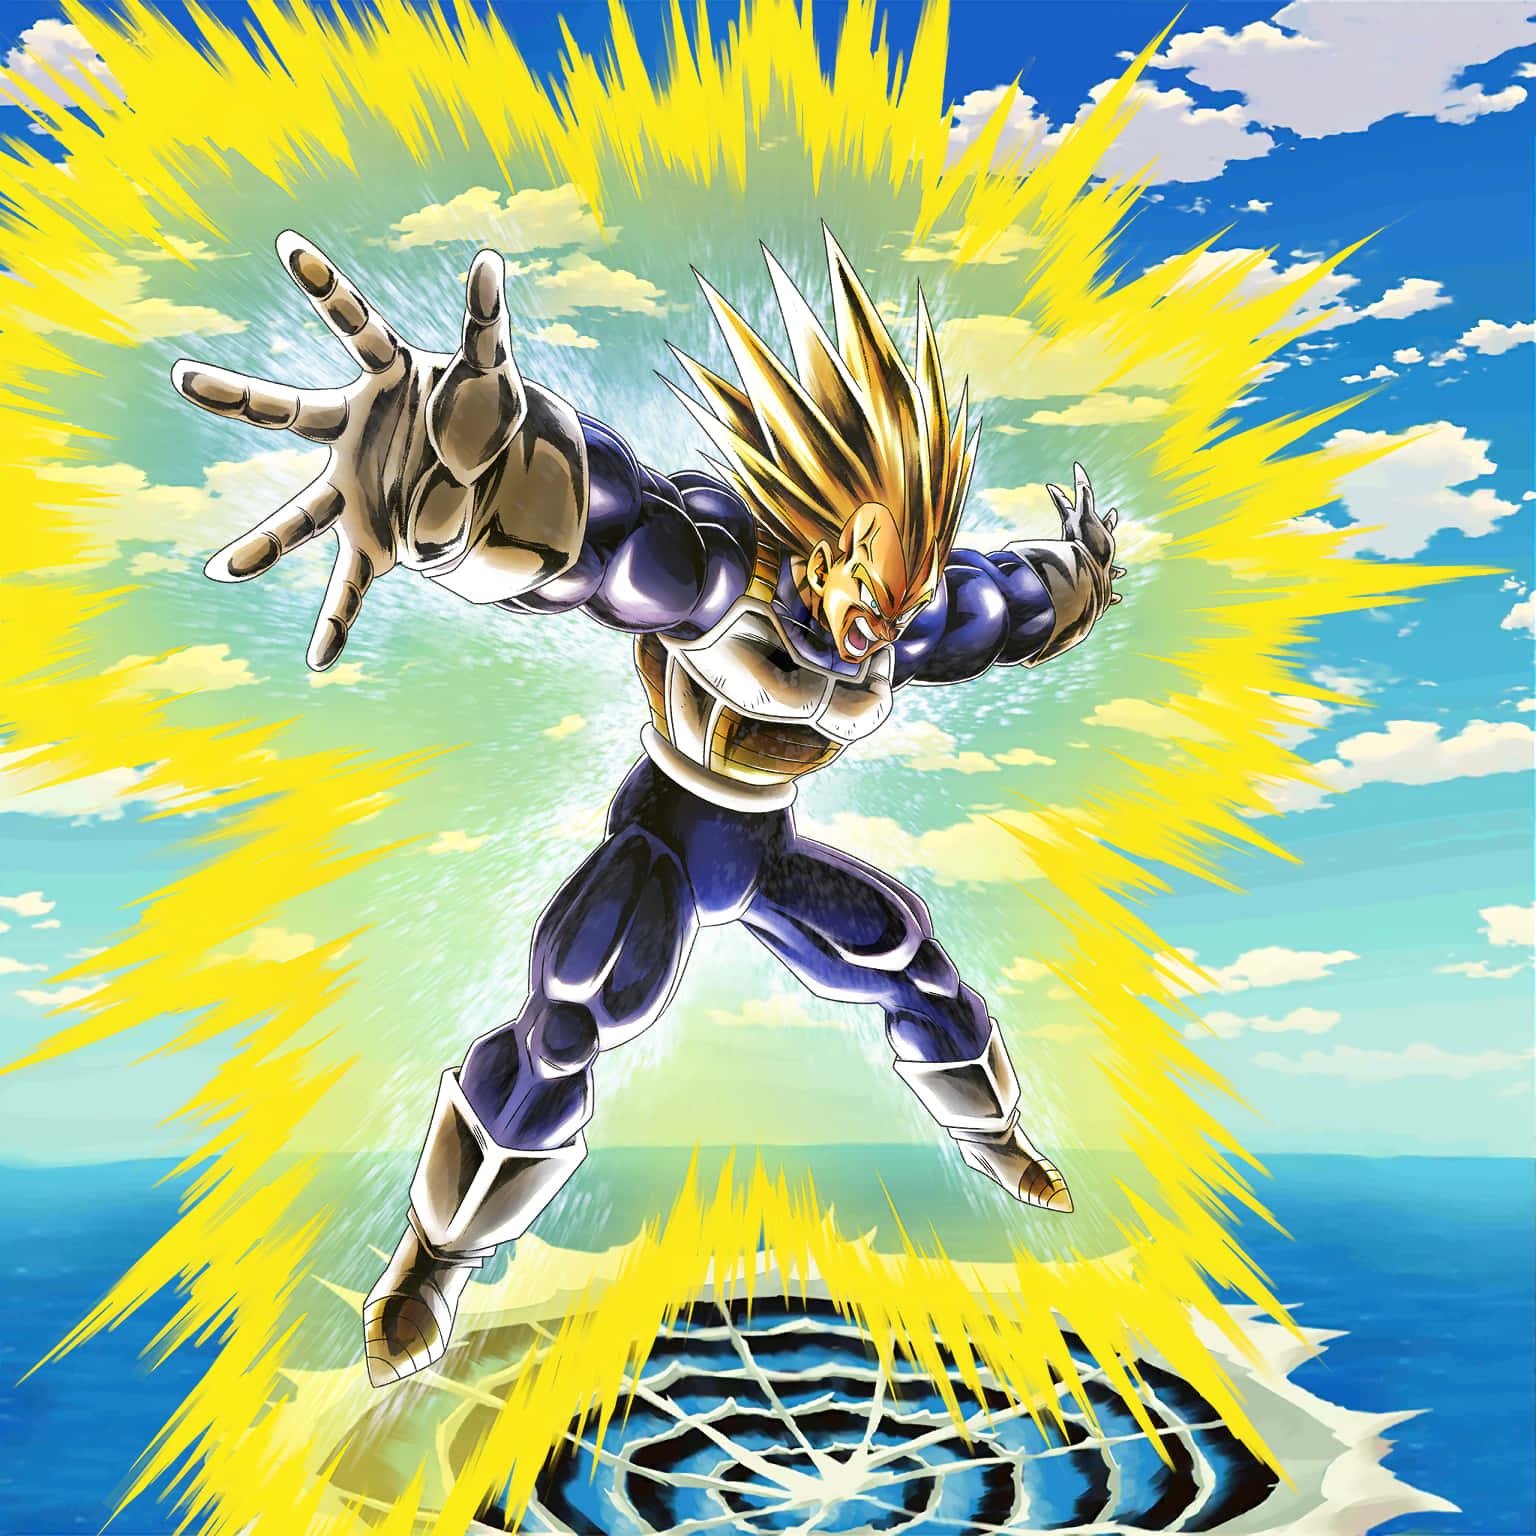 "Don't underestimate the power of the Prince of All Saiyans" Wallpaper